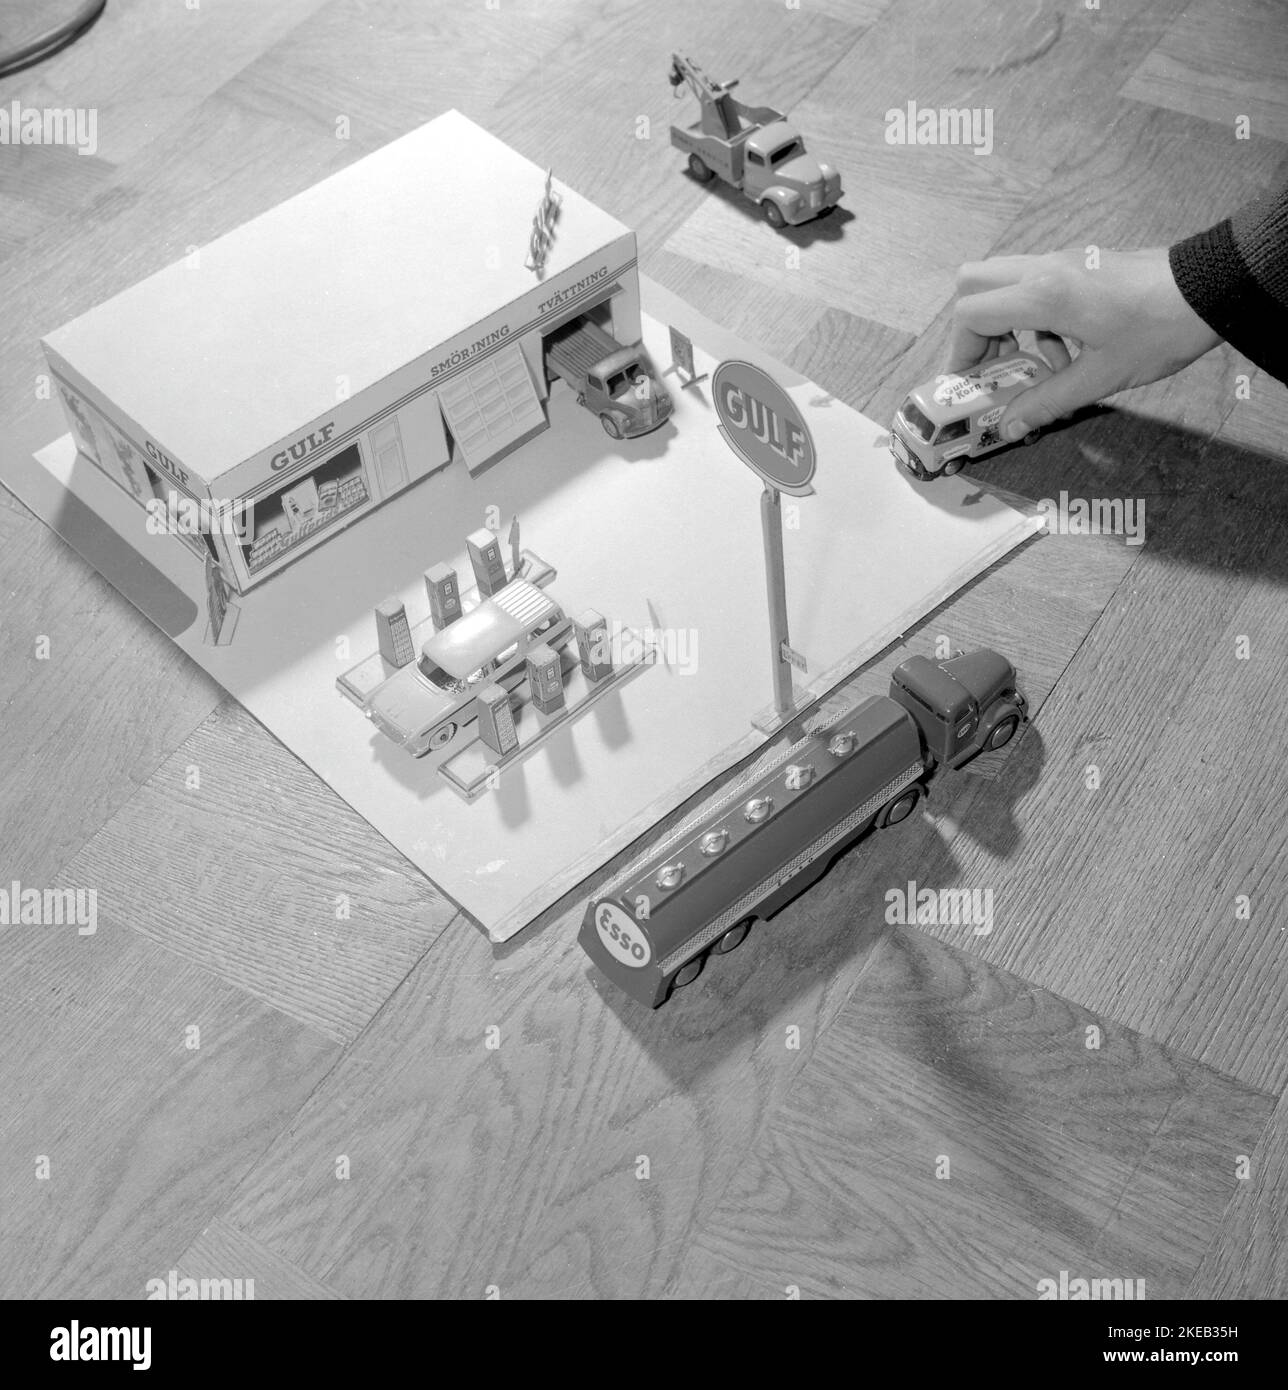 In the 1950s. A typical 1950s toy made of cardboard with printed images of petrol pumps and shop exterior. The kit was delivered as a flat cardboard and you had to cut and fold the pieces together to build the Gulf gas station.  The year is 1958. Sweden. Conard. ref 3867 Stock Photo